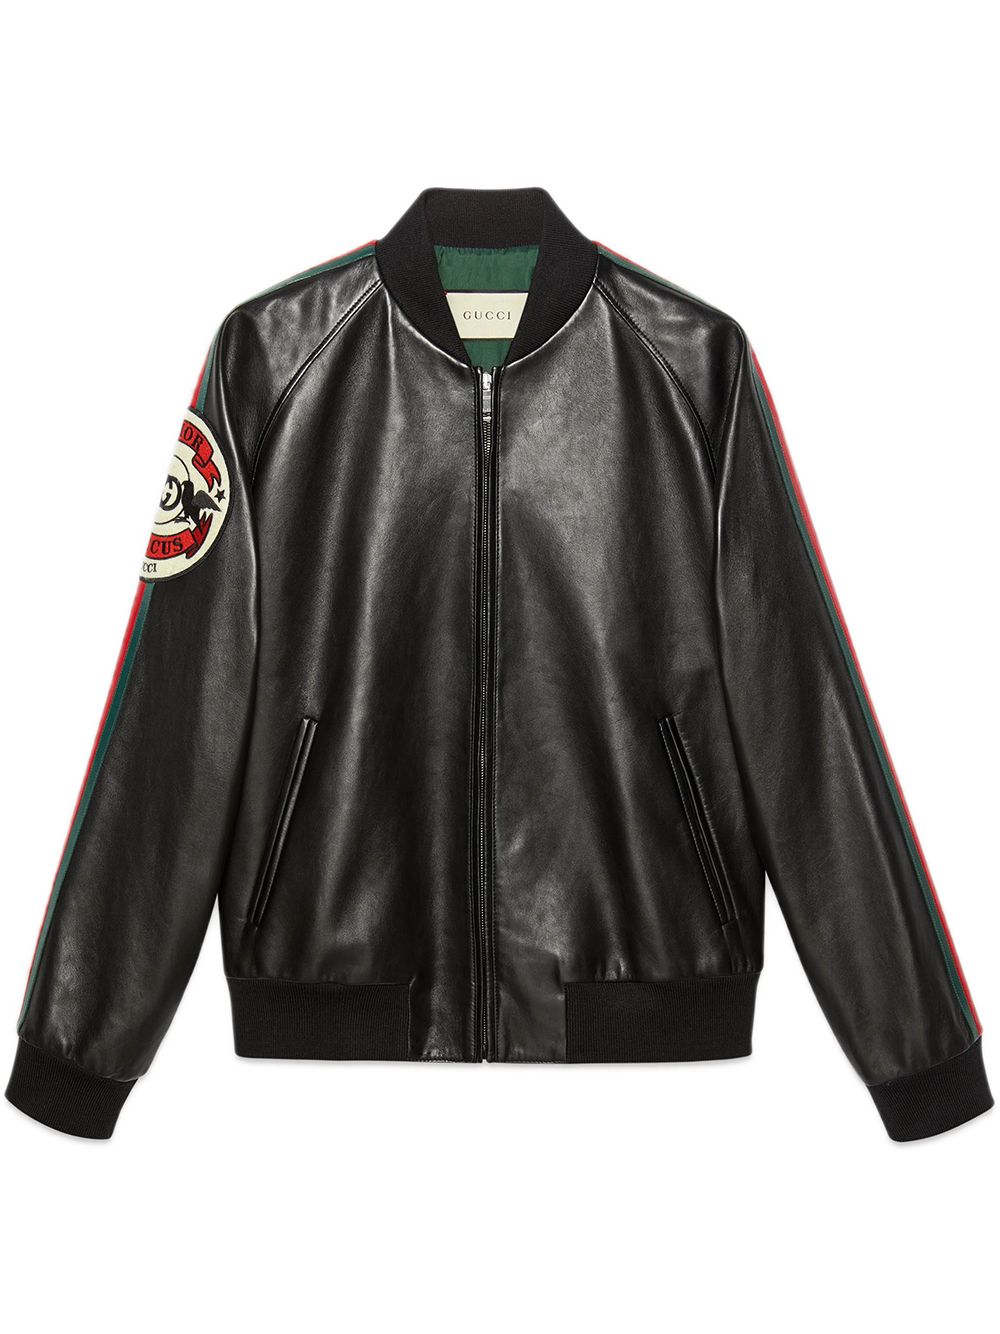 Gucci Leather Bomber Jacket With Patch - Farfetch